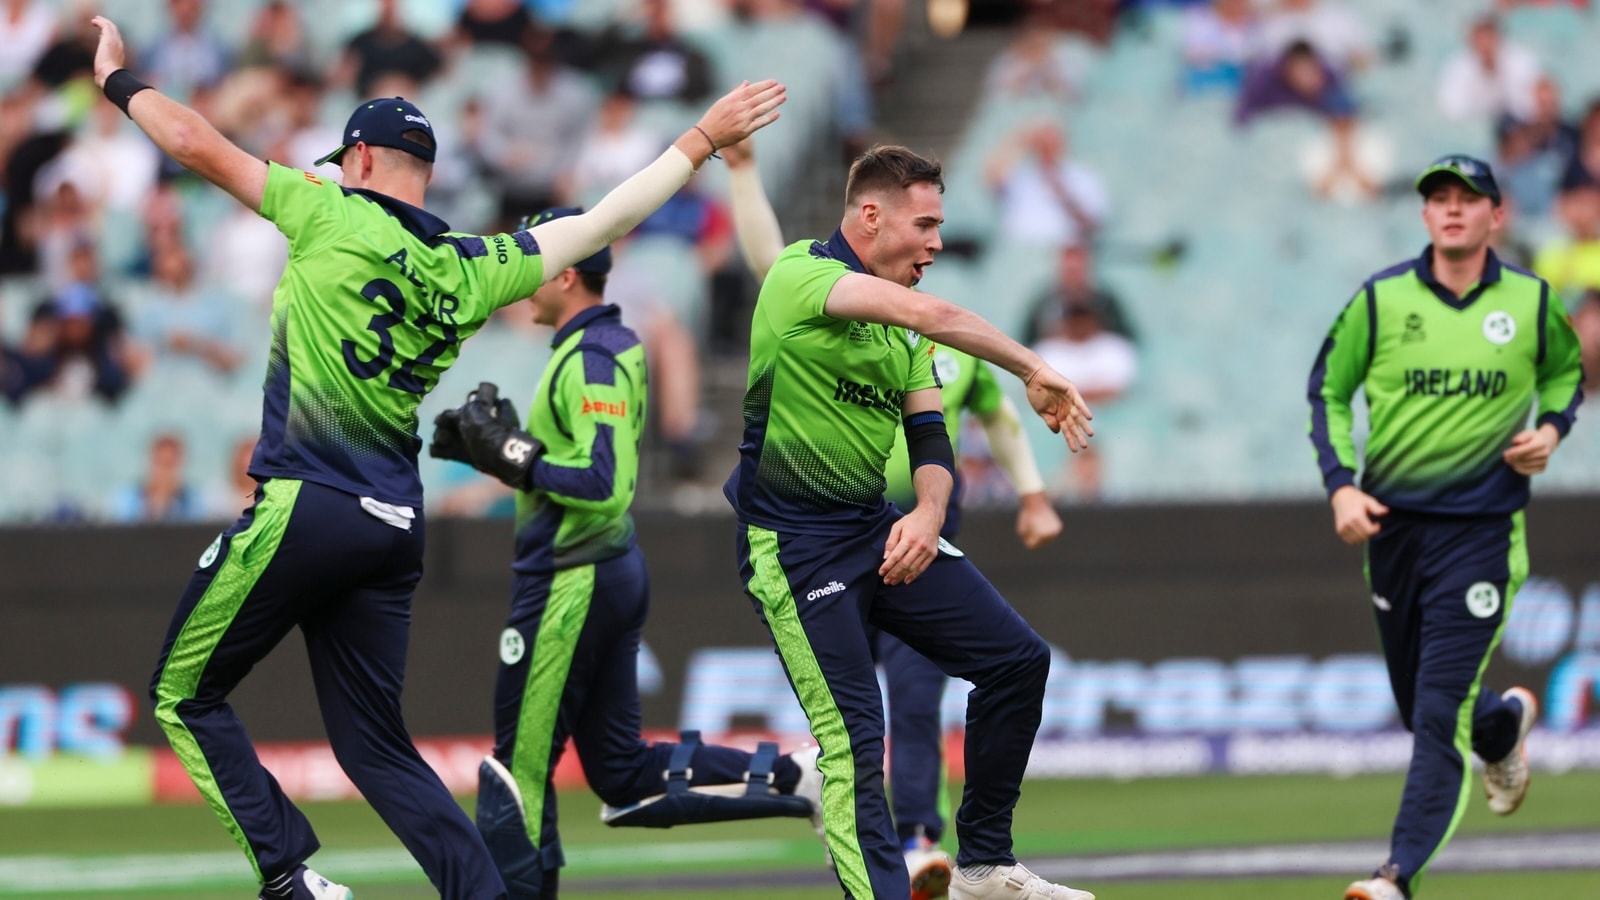 ireland-vs-england-t20-world-cup-2022-highlights-ire-stun-eng-in-rain-hit-game-at-mcg